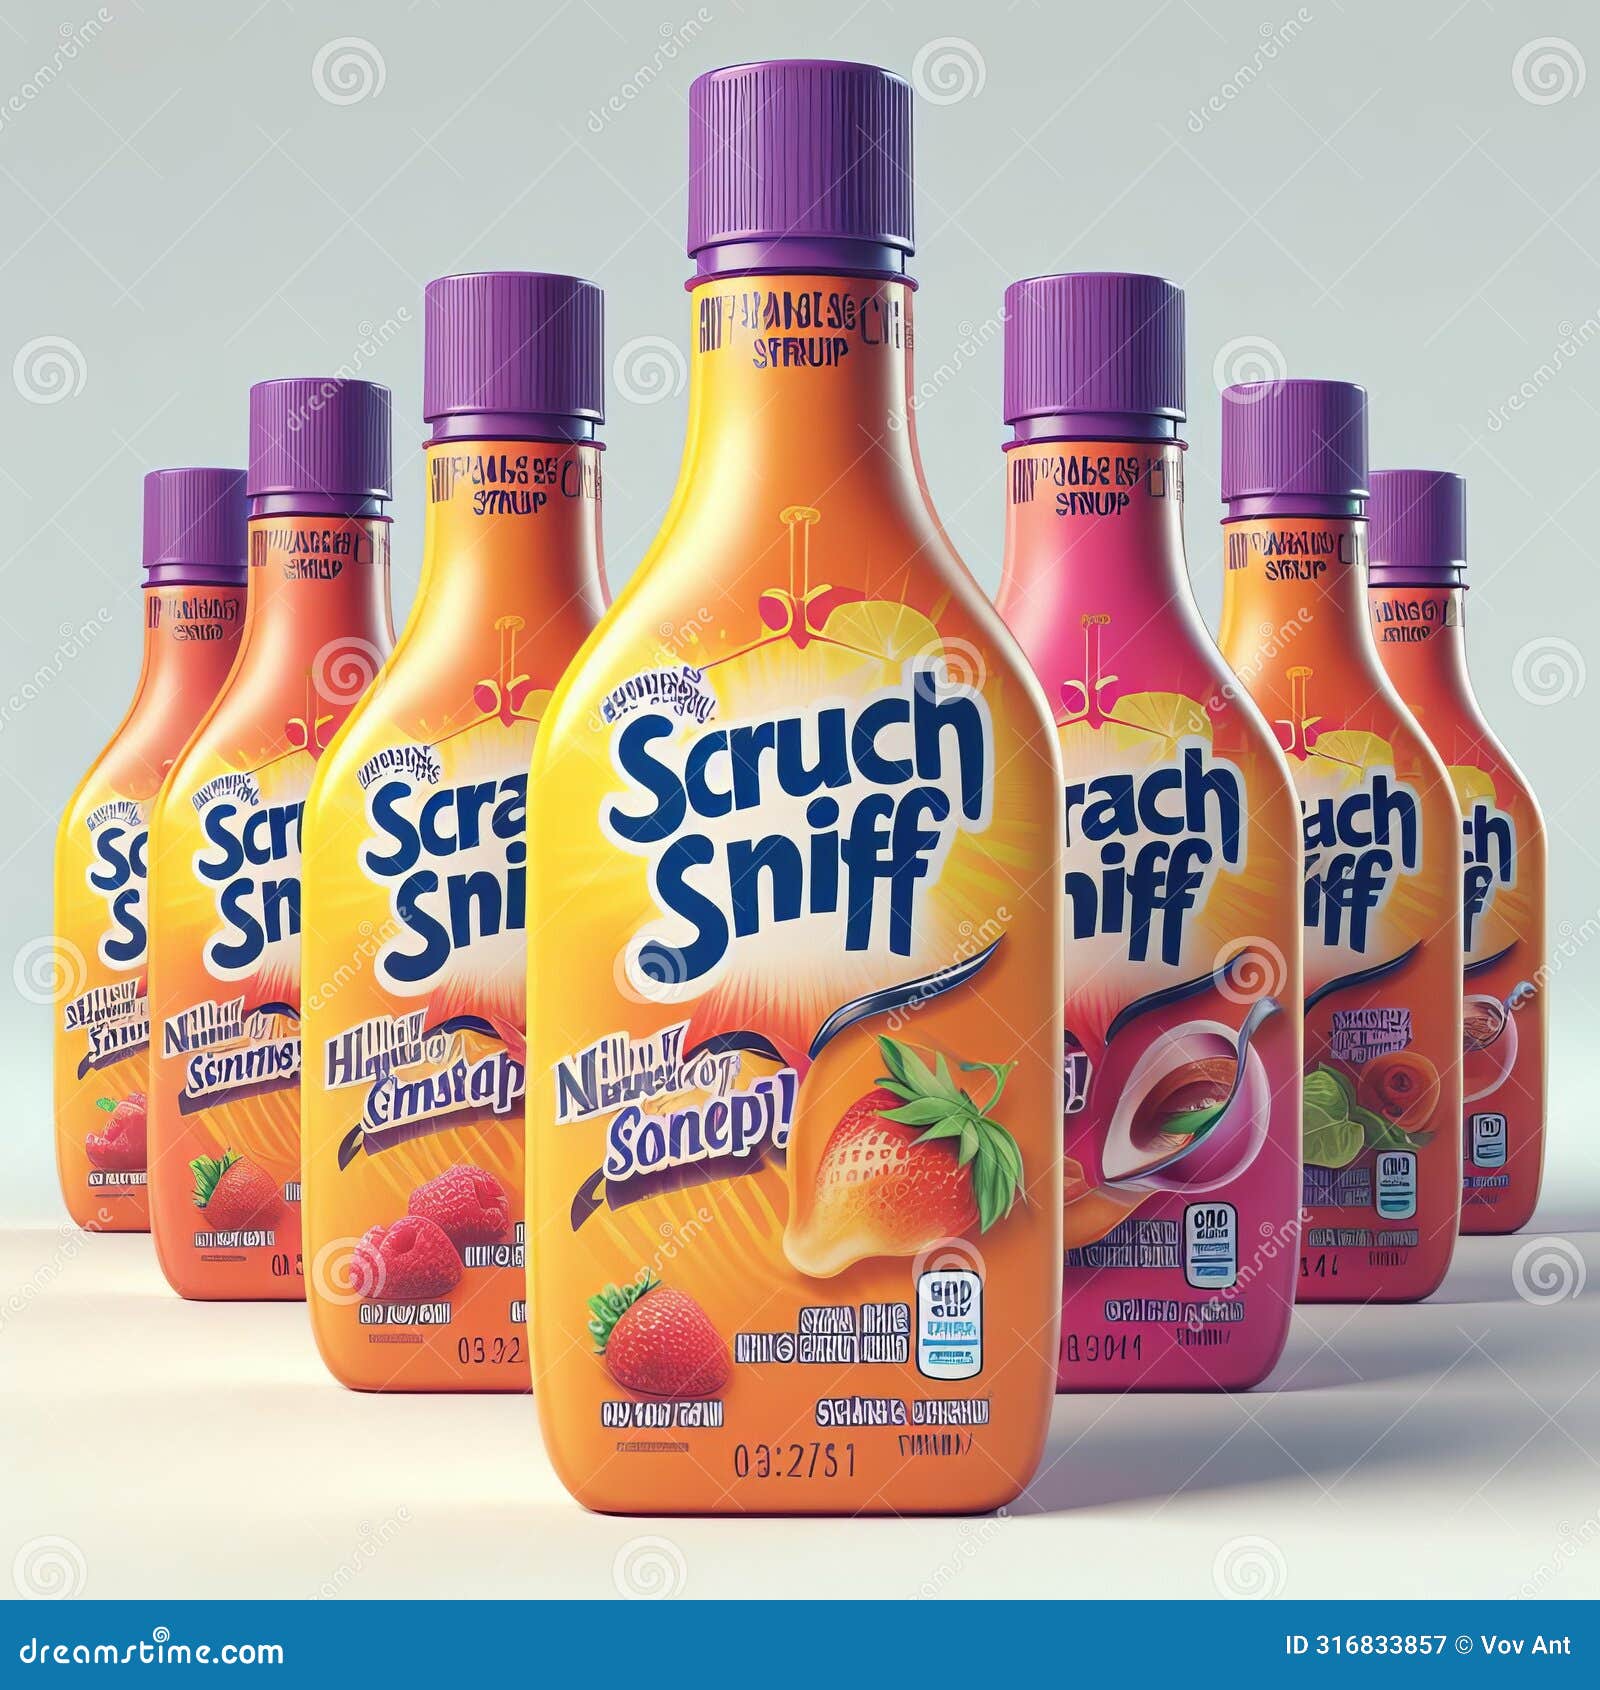 scratch and sniff syrups syrups with hidden scents that can b